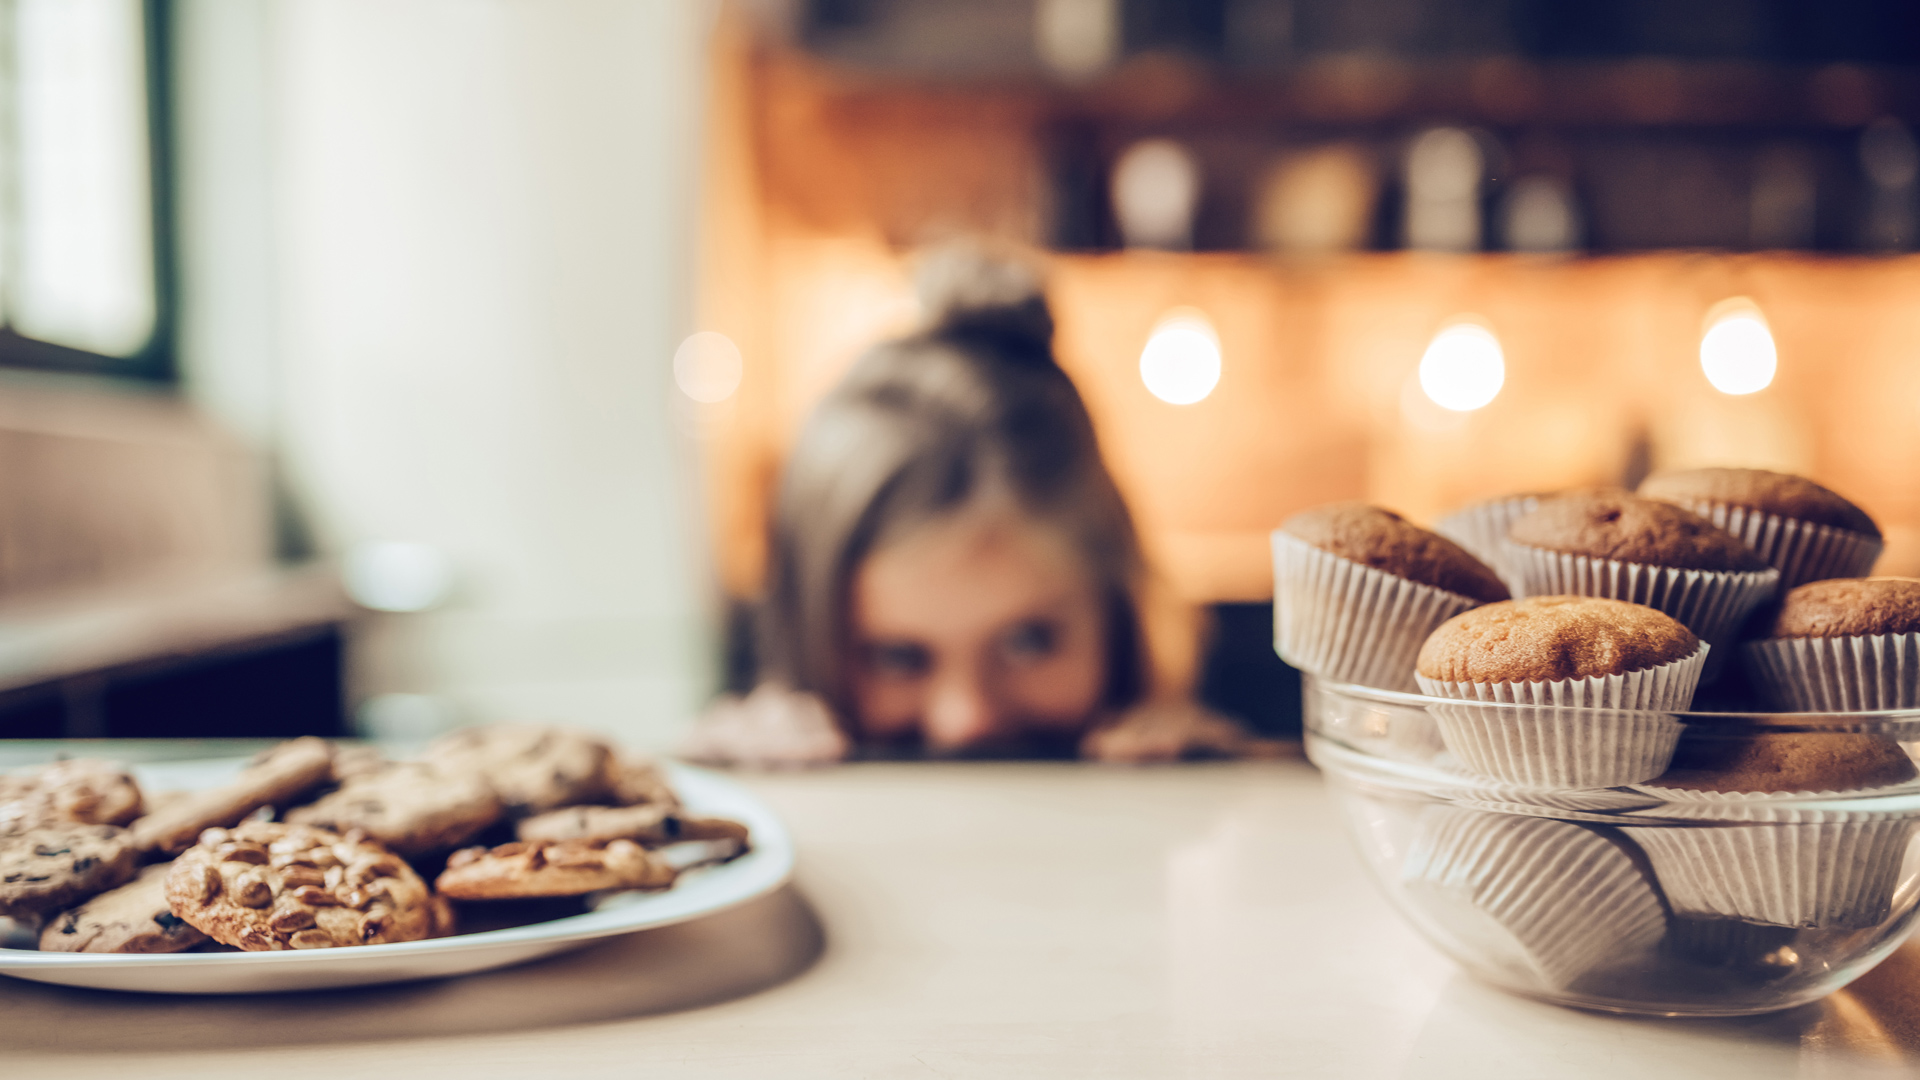 Little girl on the edge of the counter eyeing plates of cookies and muffins